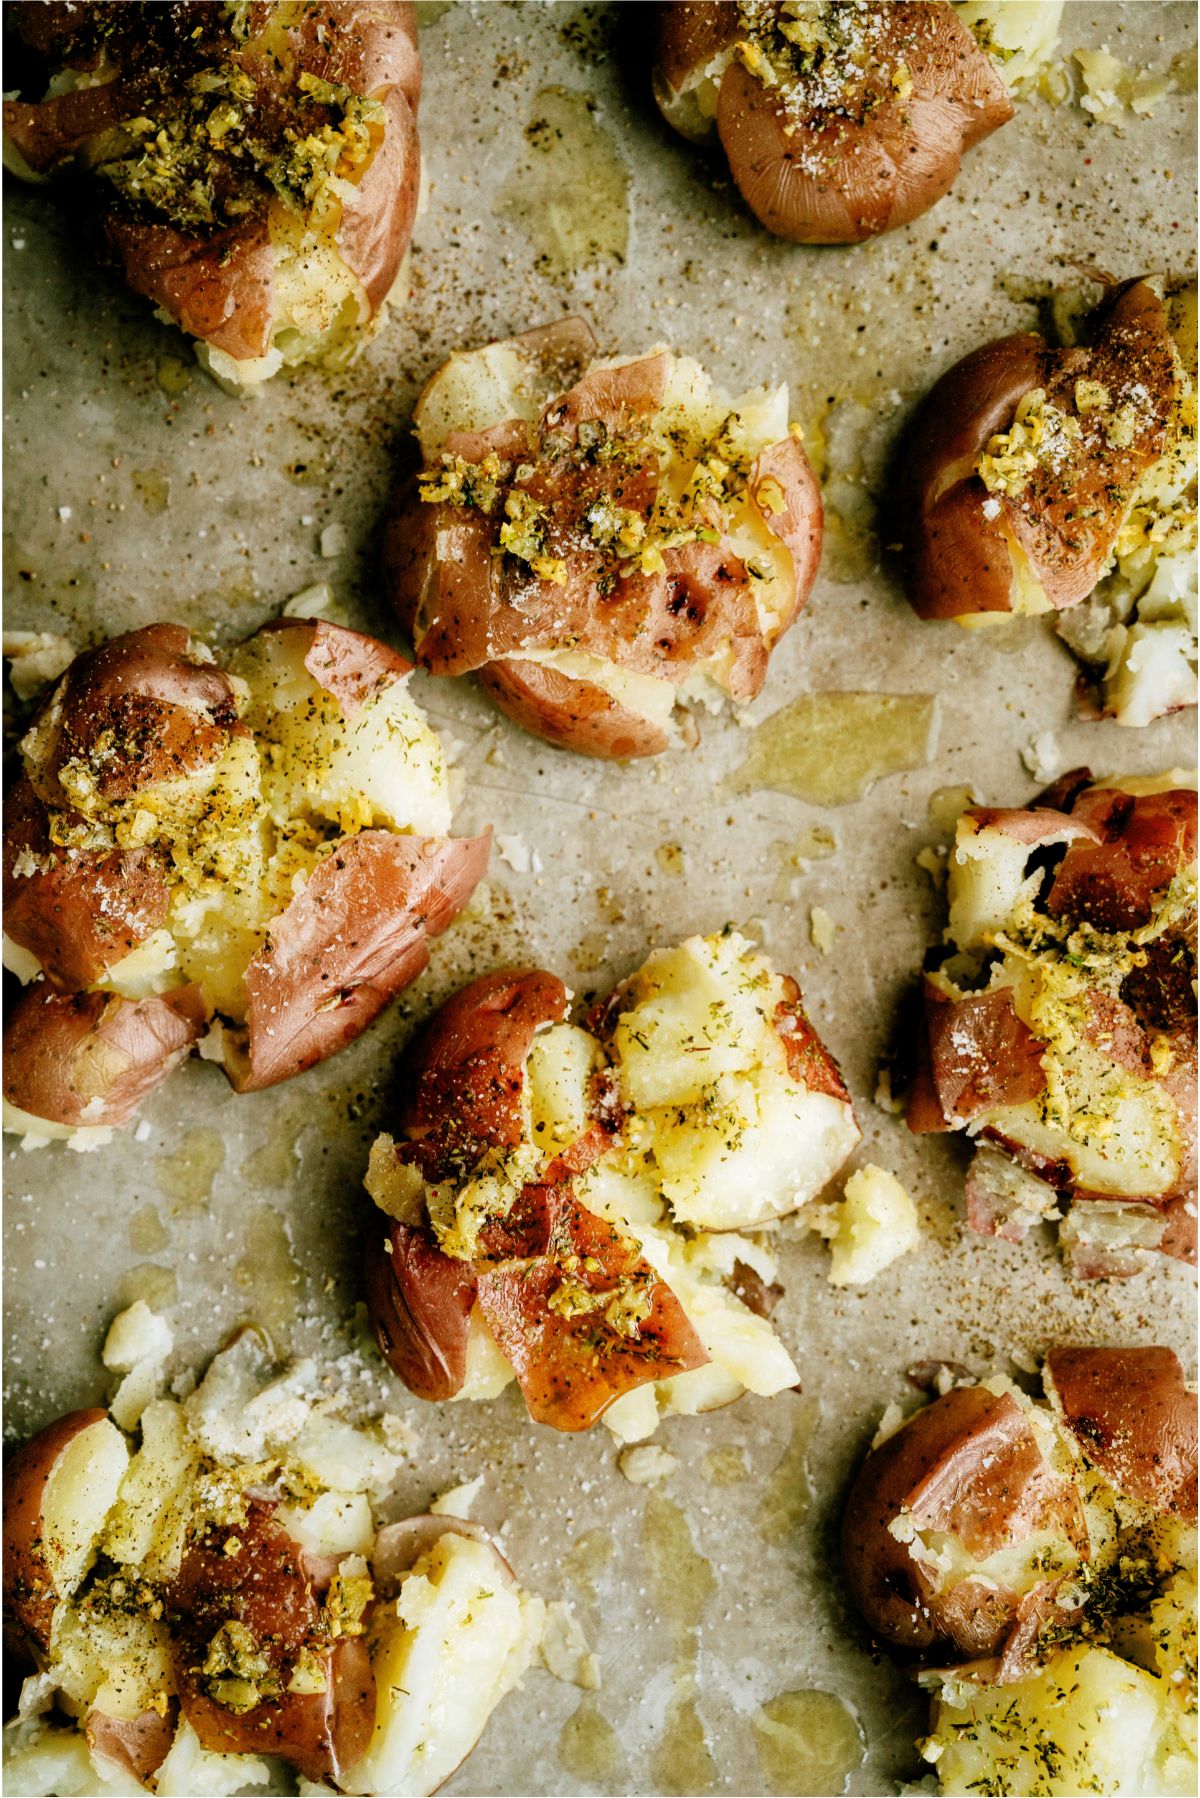 Top view of Smashed Italian Red Potatoes on a baking sheet